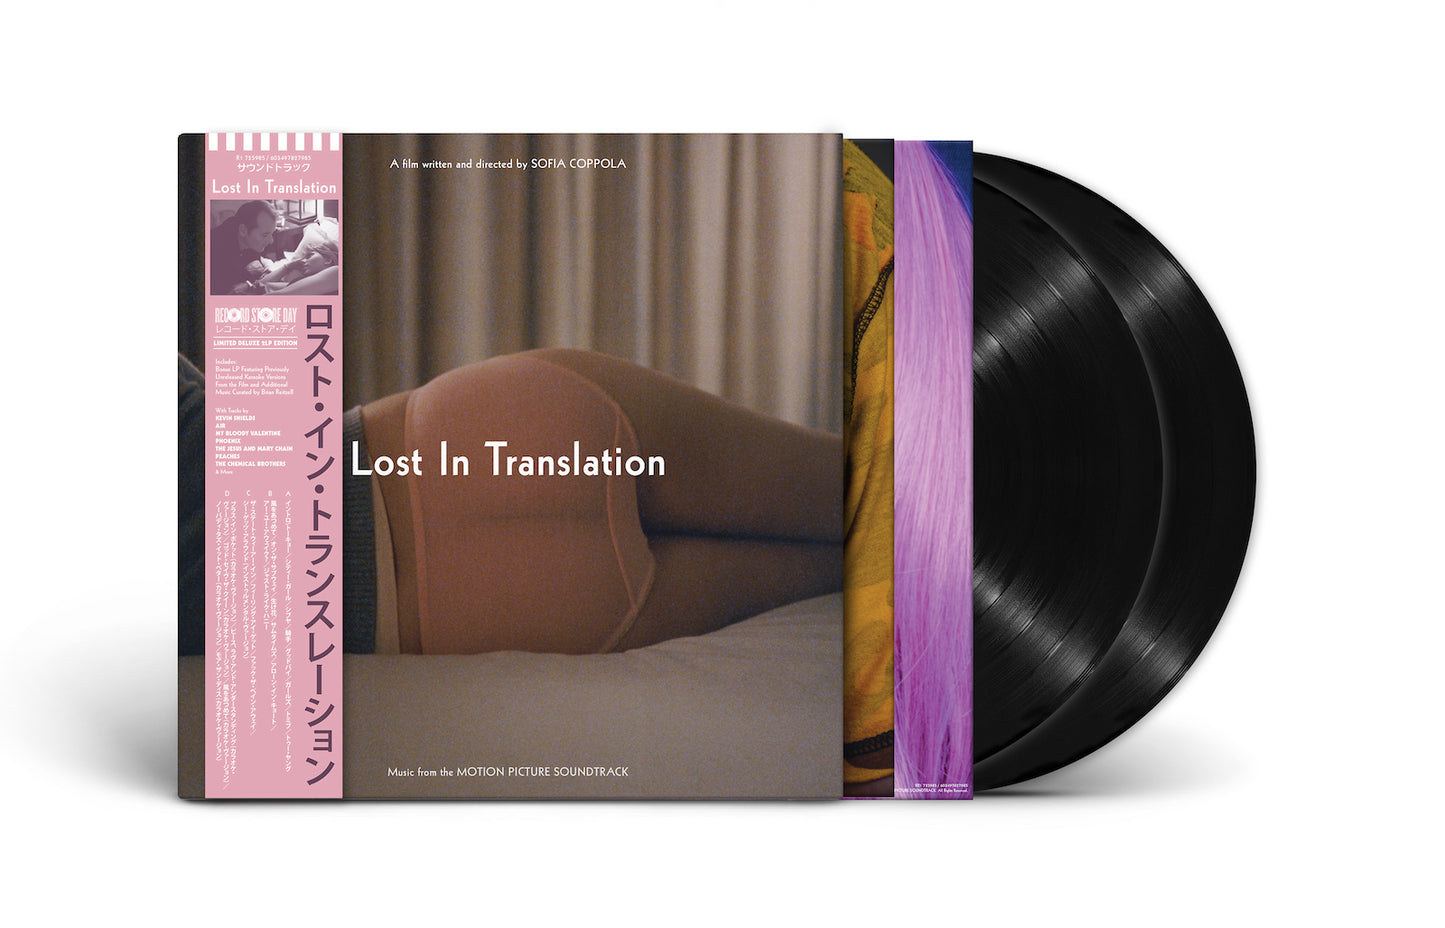 Lost in Translation - Music from Lost in Translation (Limited Deluxe 2X LP Edition) RSD 2024